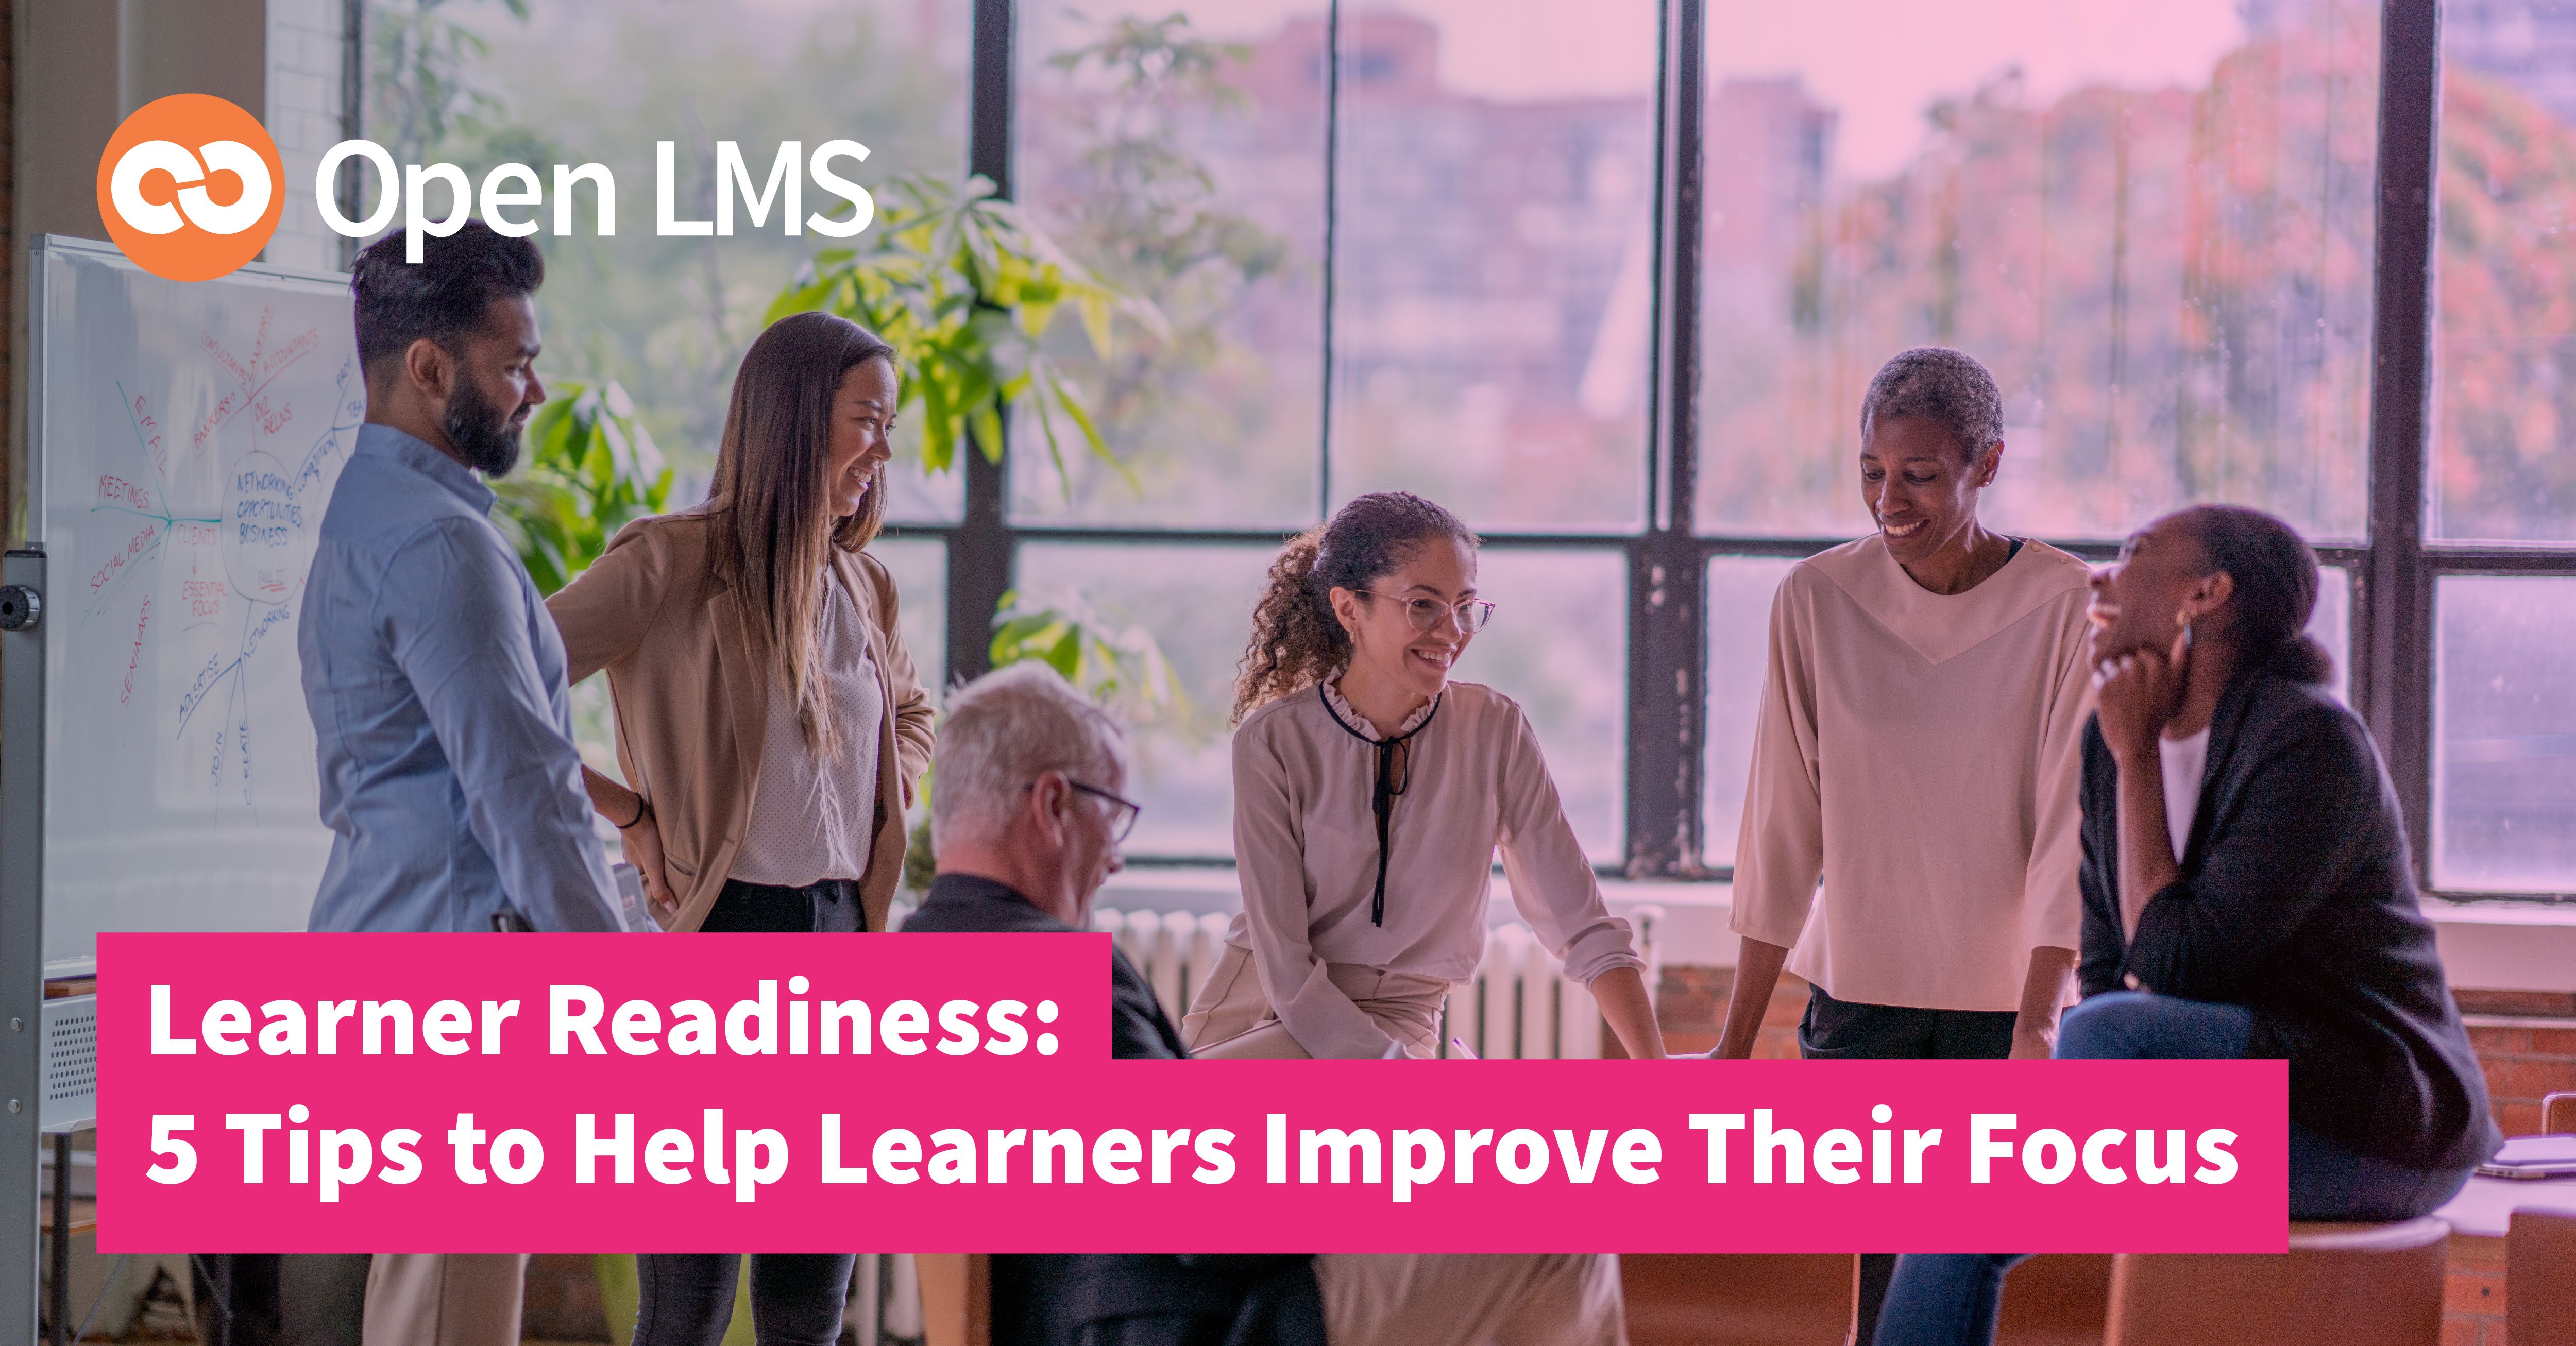 Group of people in an office with the title reading 'Learner Readiness: 5 Tips to Help Learners Improve Their Focus'